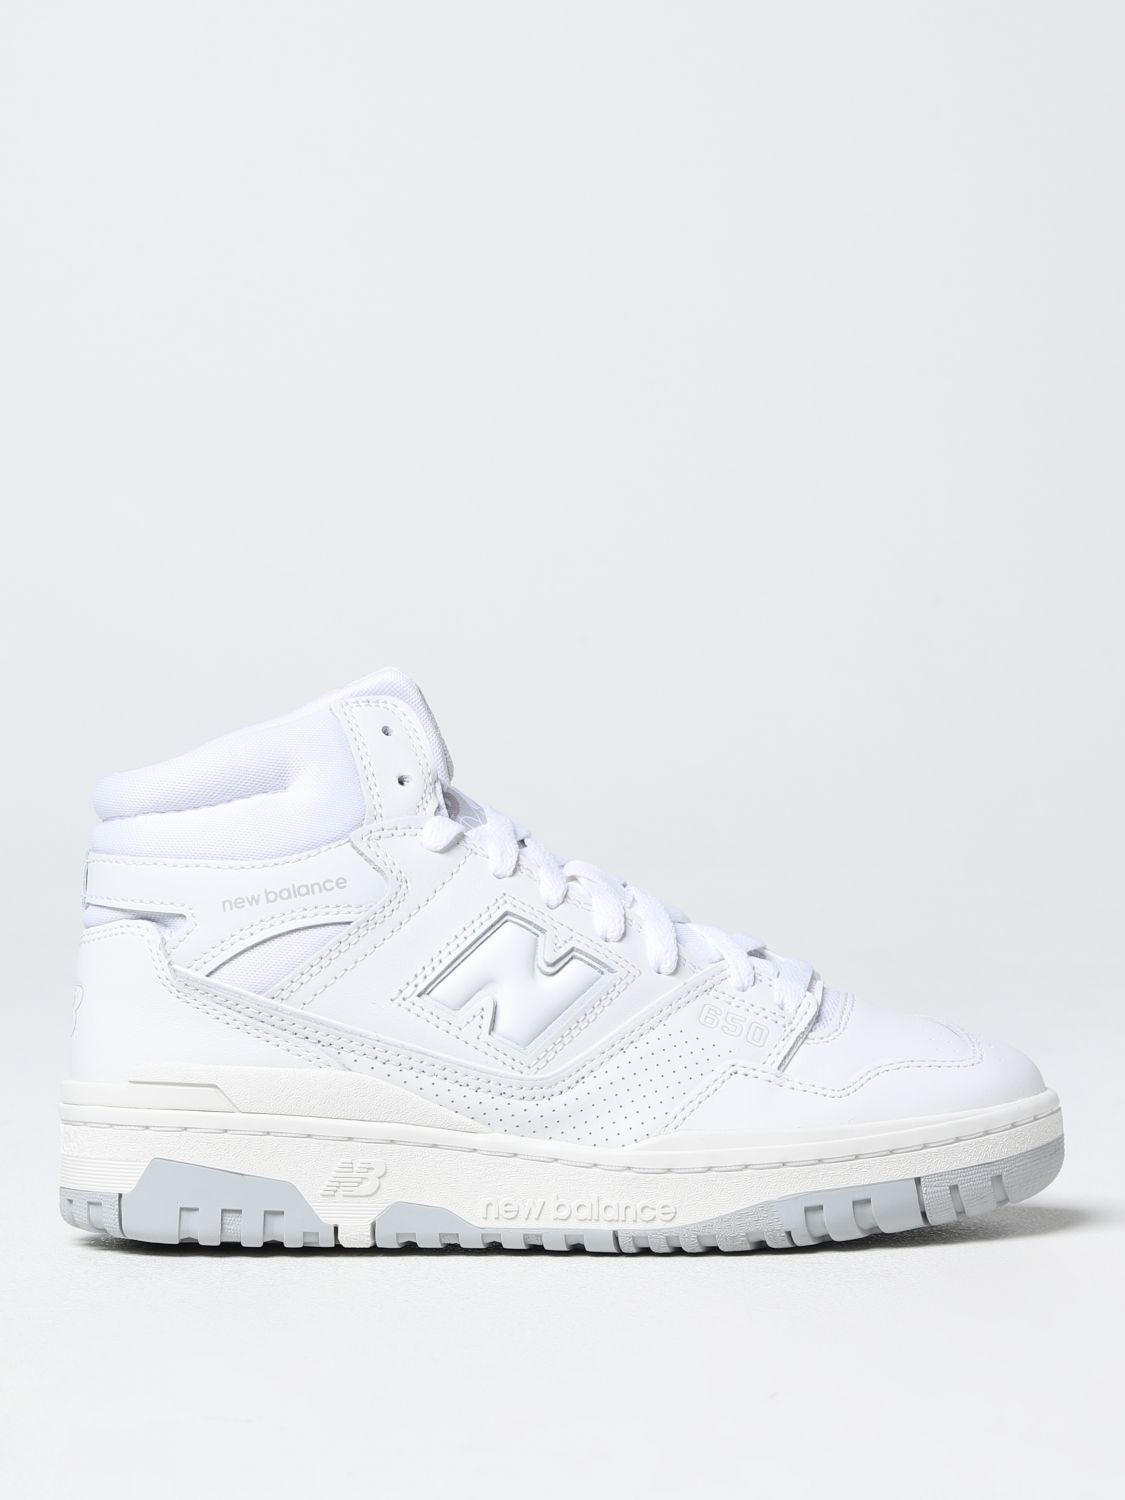 NEW BALANCE SNEAKERS NEW BALANCE WOMAN COLOR WHITE,385243001